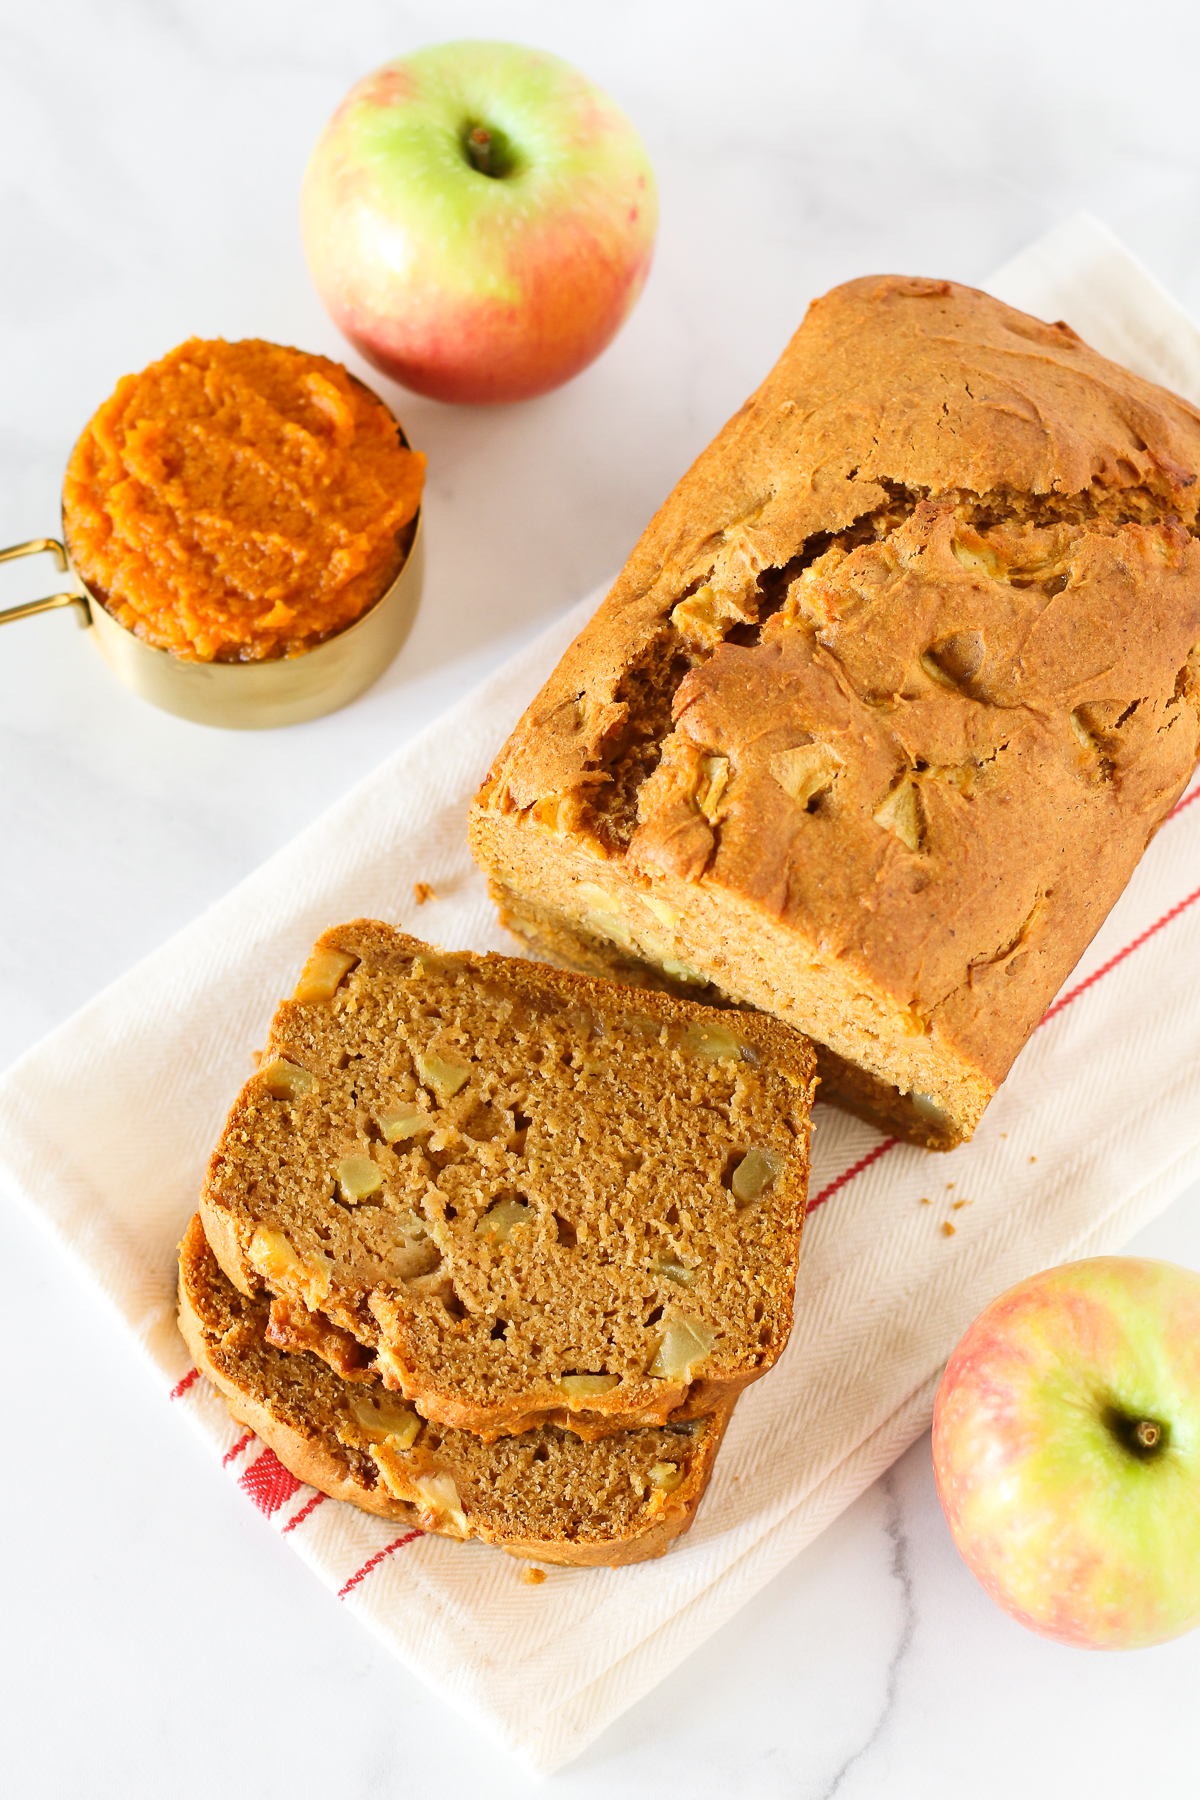 Gluten Free Vegan Pumpkin Apple Bread. Thick slices of pumpkin bread, loaded with fresh apples. A lovely fall treat.